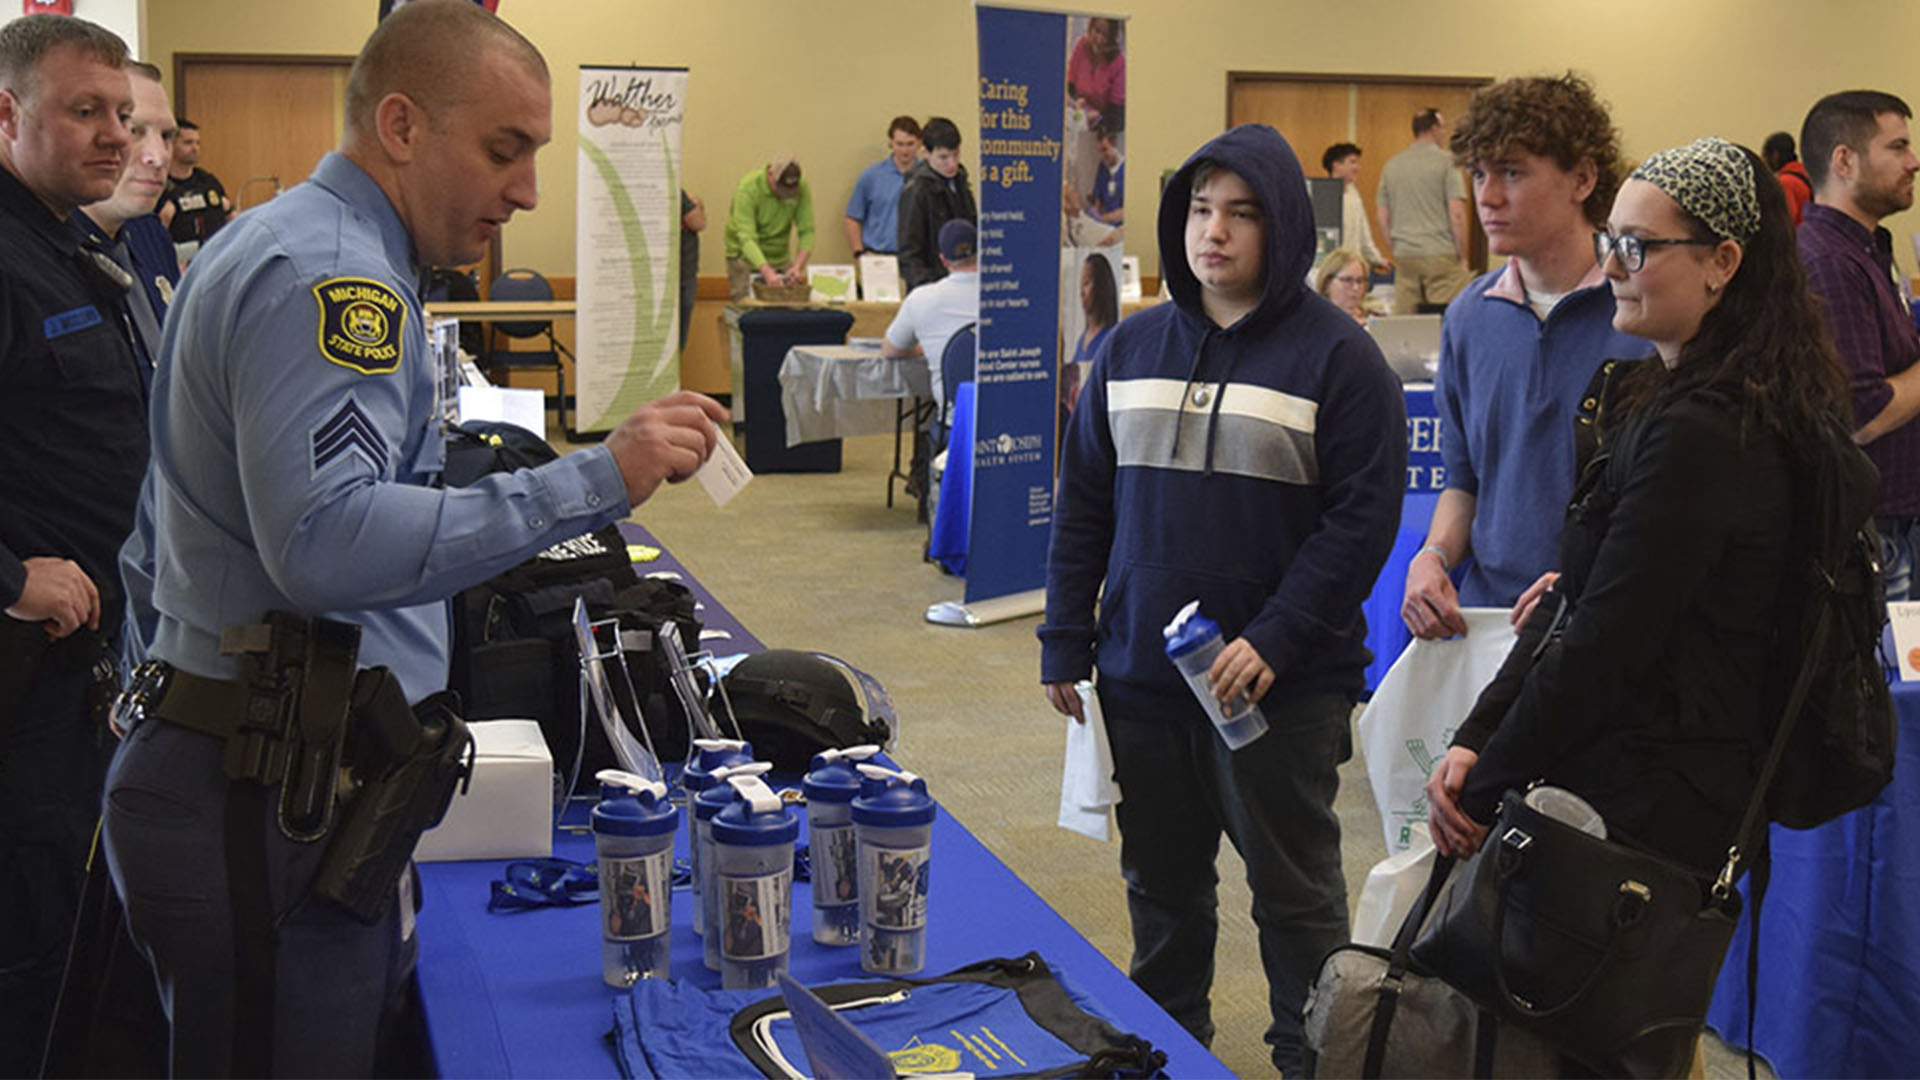 Students interacting with companies at career fair